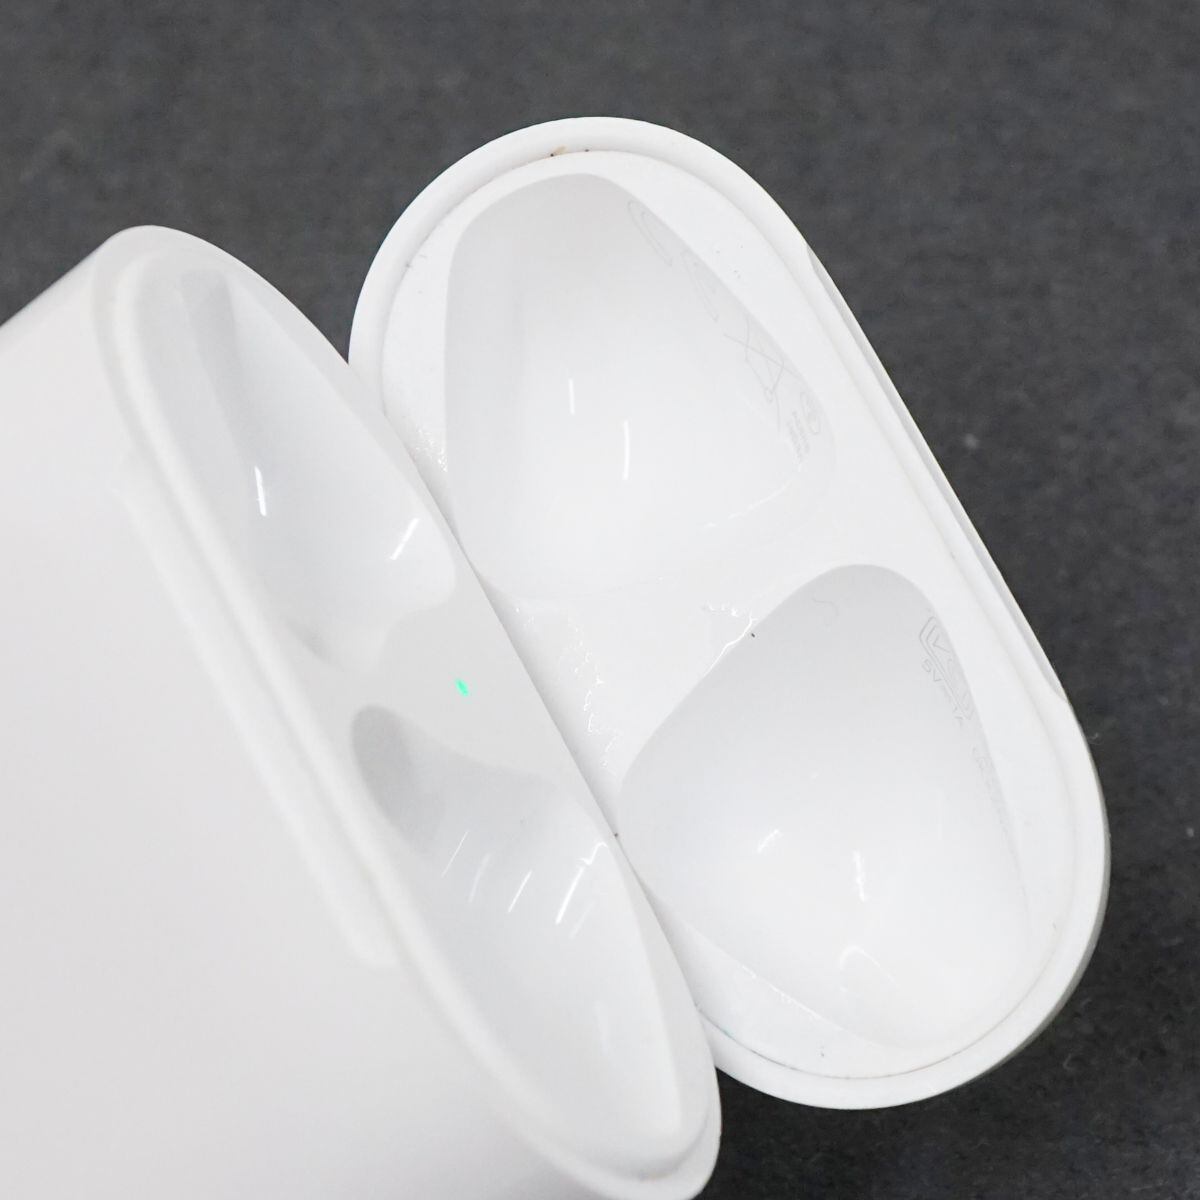 Apple AirPods with Charging Case エアーポッズ 充電ケースのみ 第二 